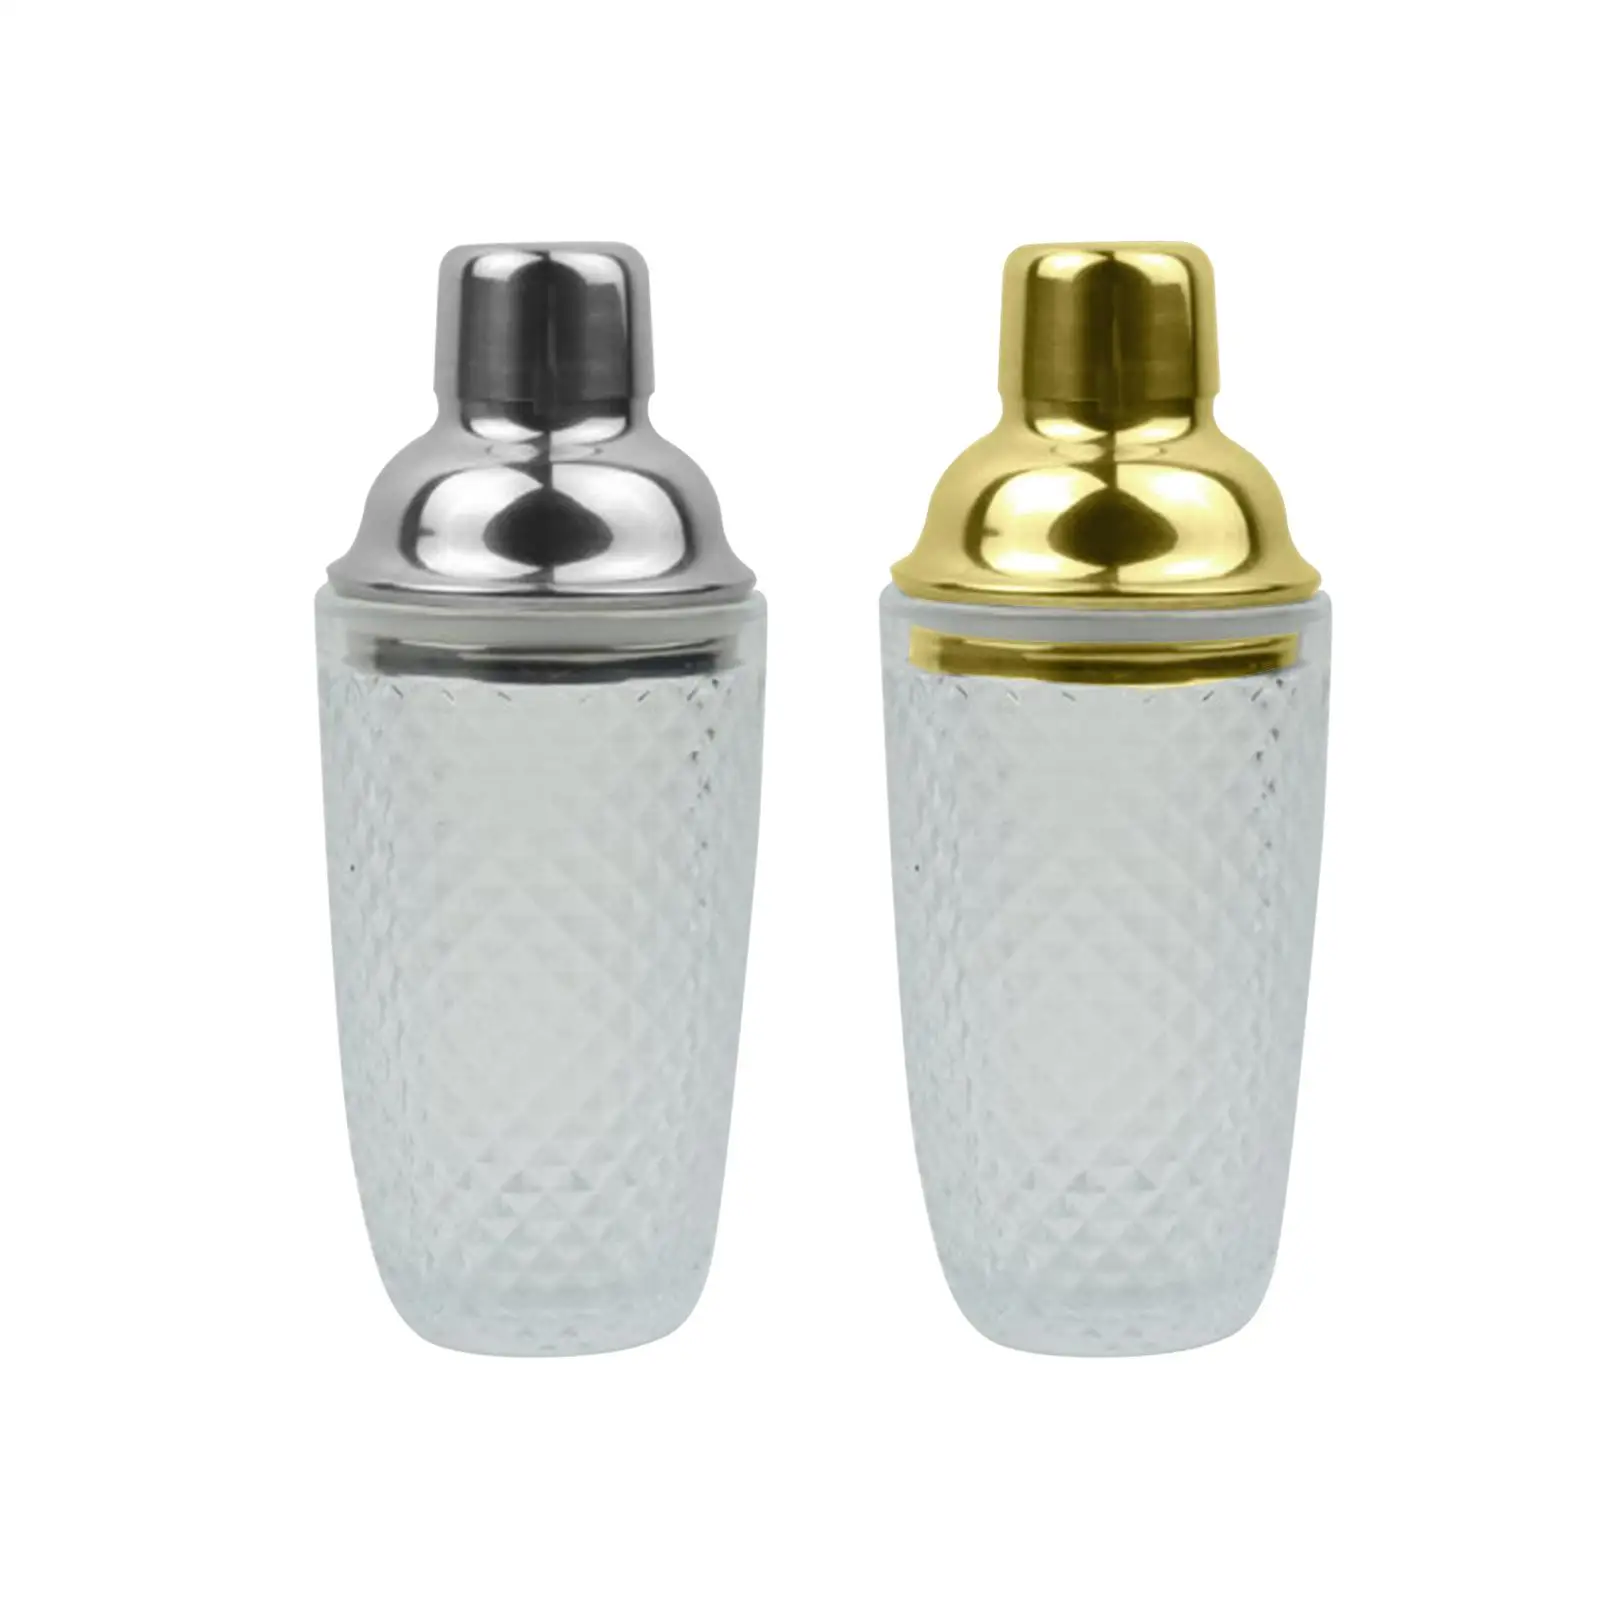 Glass Cocktail Shaker 350ml Martini Making Set with Leakproof Steel Lid